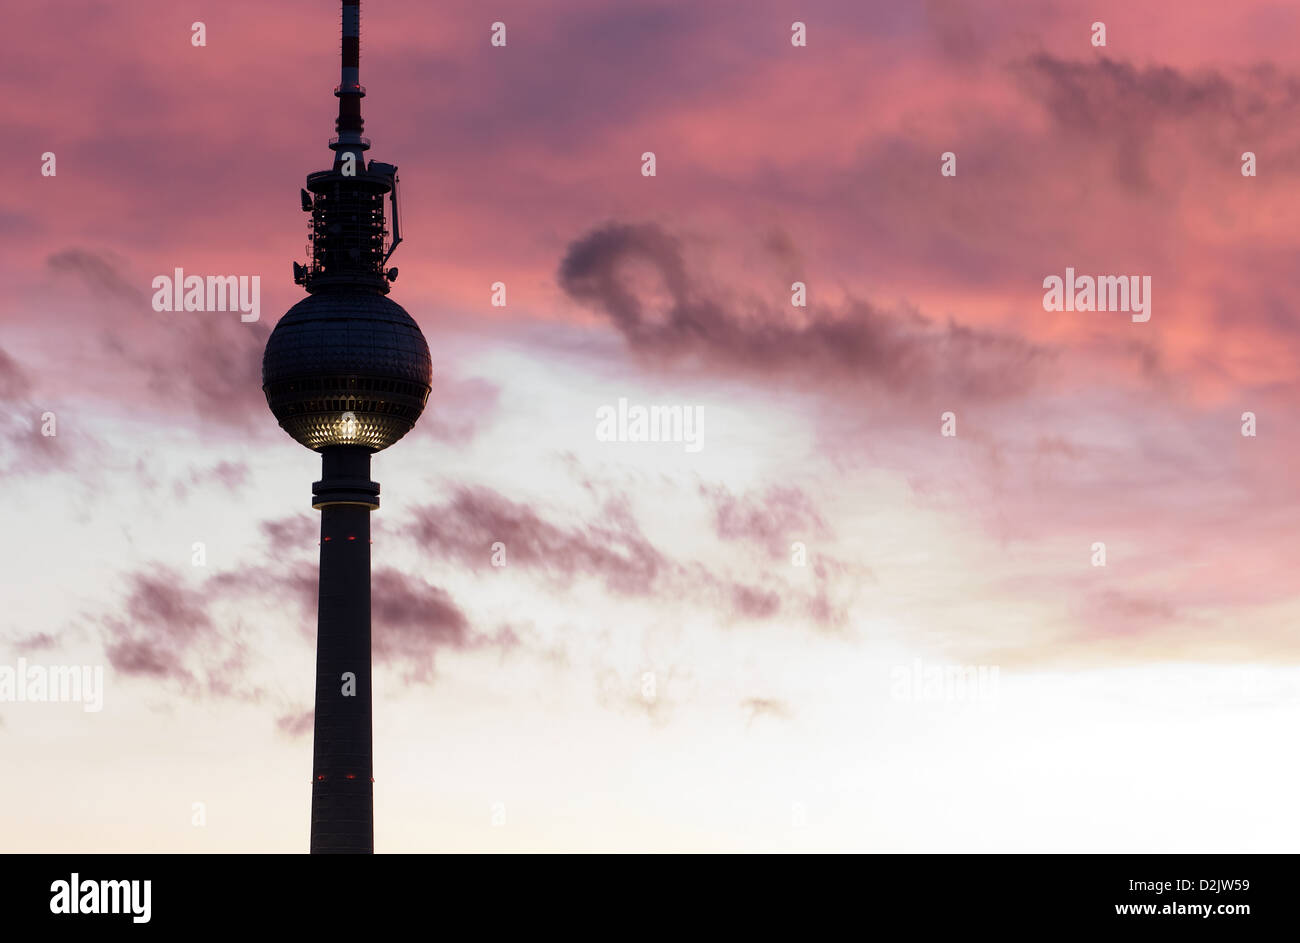 Berlin, Germany, the Berlin TV tower at sunset Stock Photo